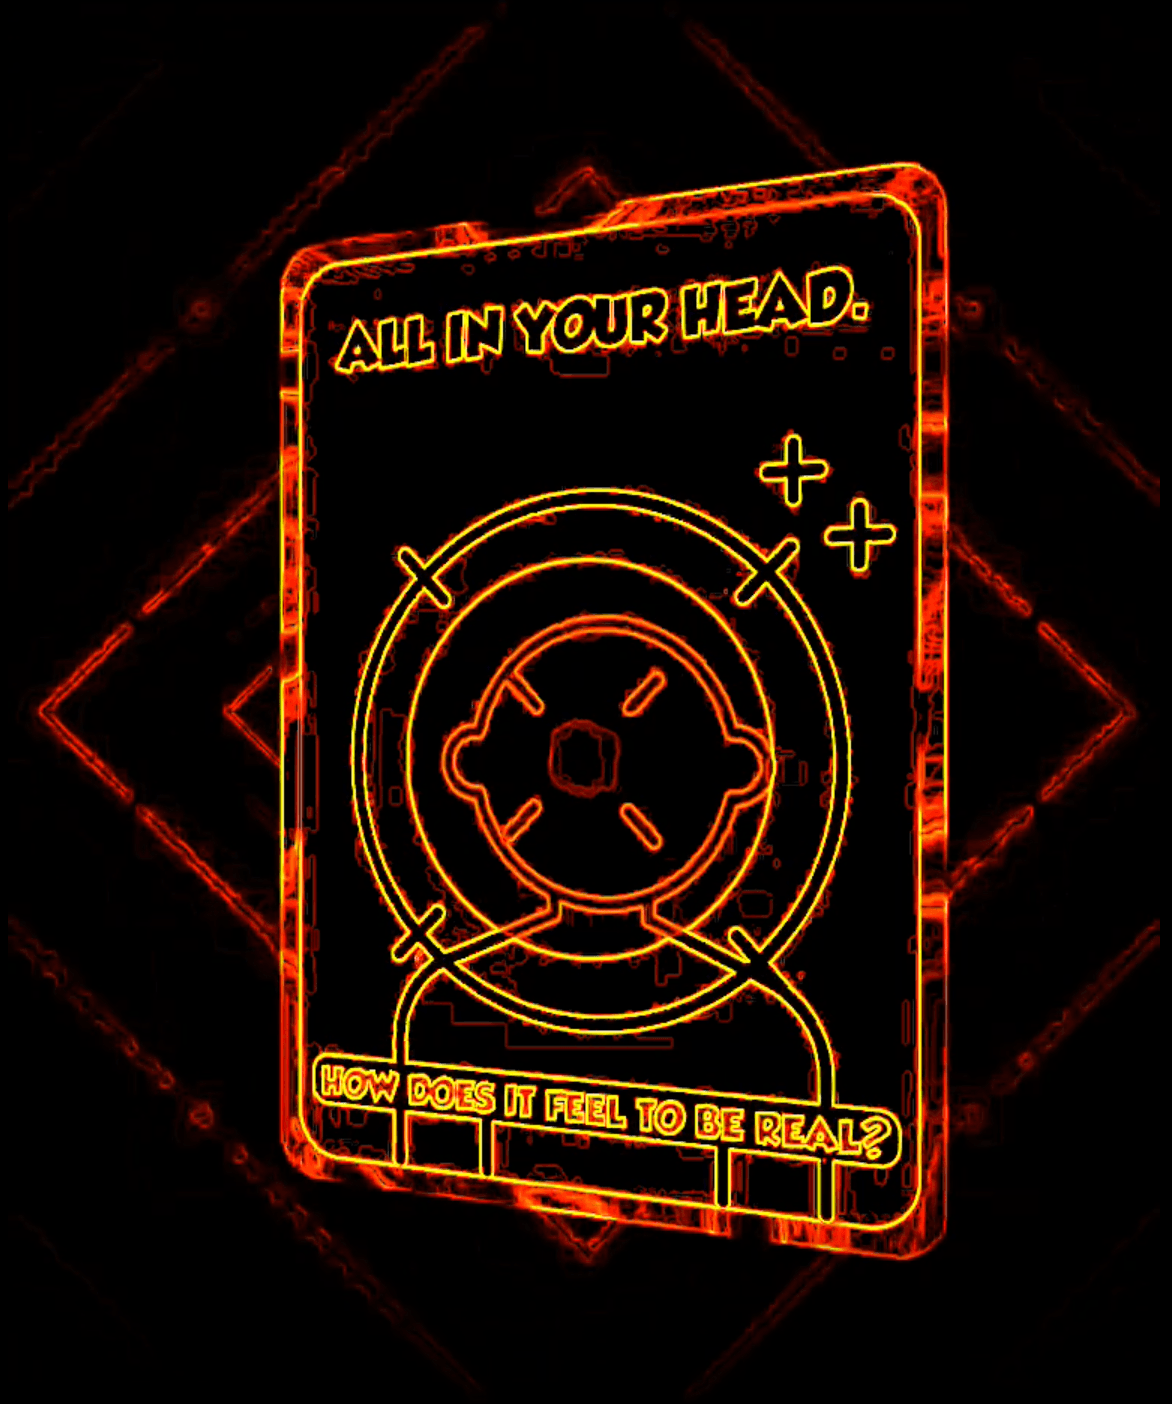 All in your head "How does it feel to be real?" "Rellow" Dez Cible collectible card